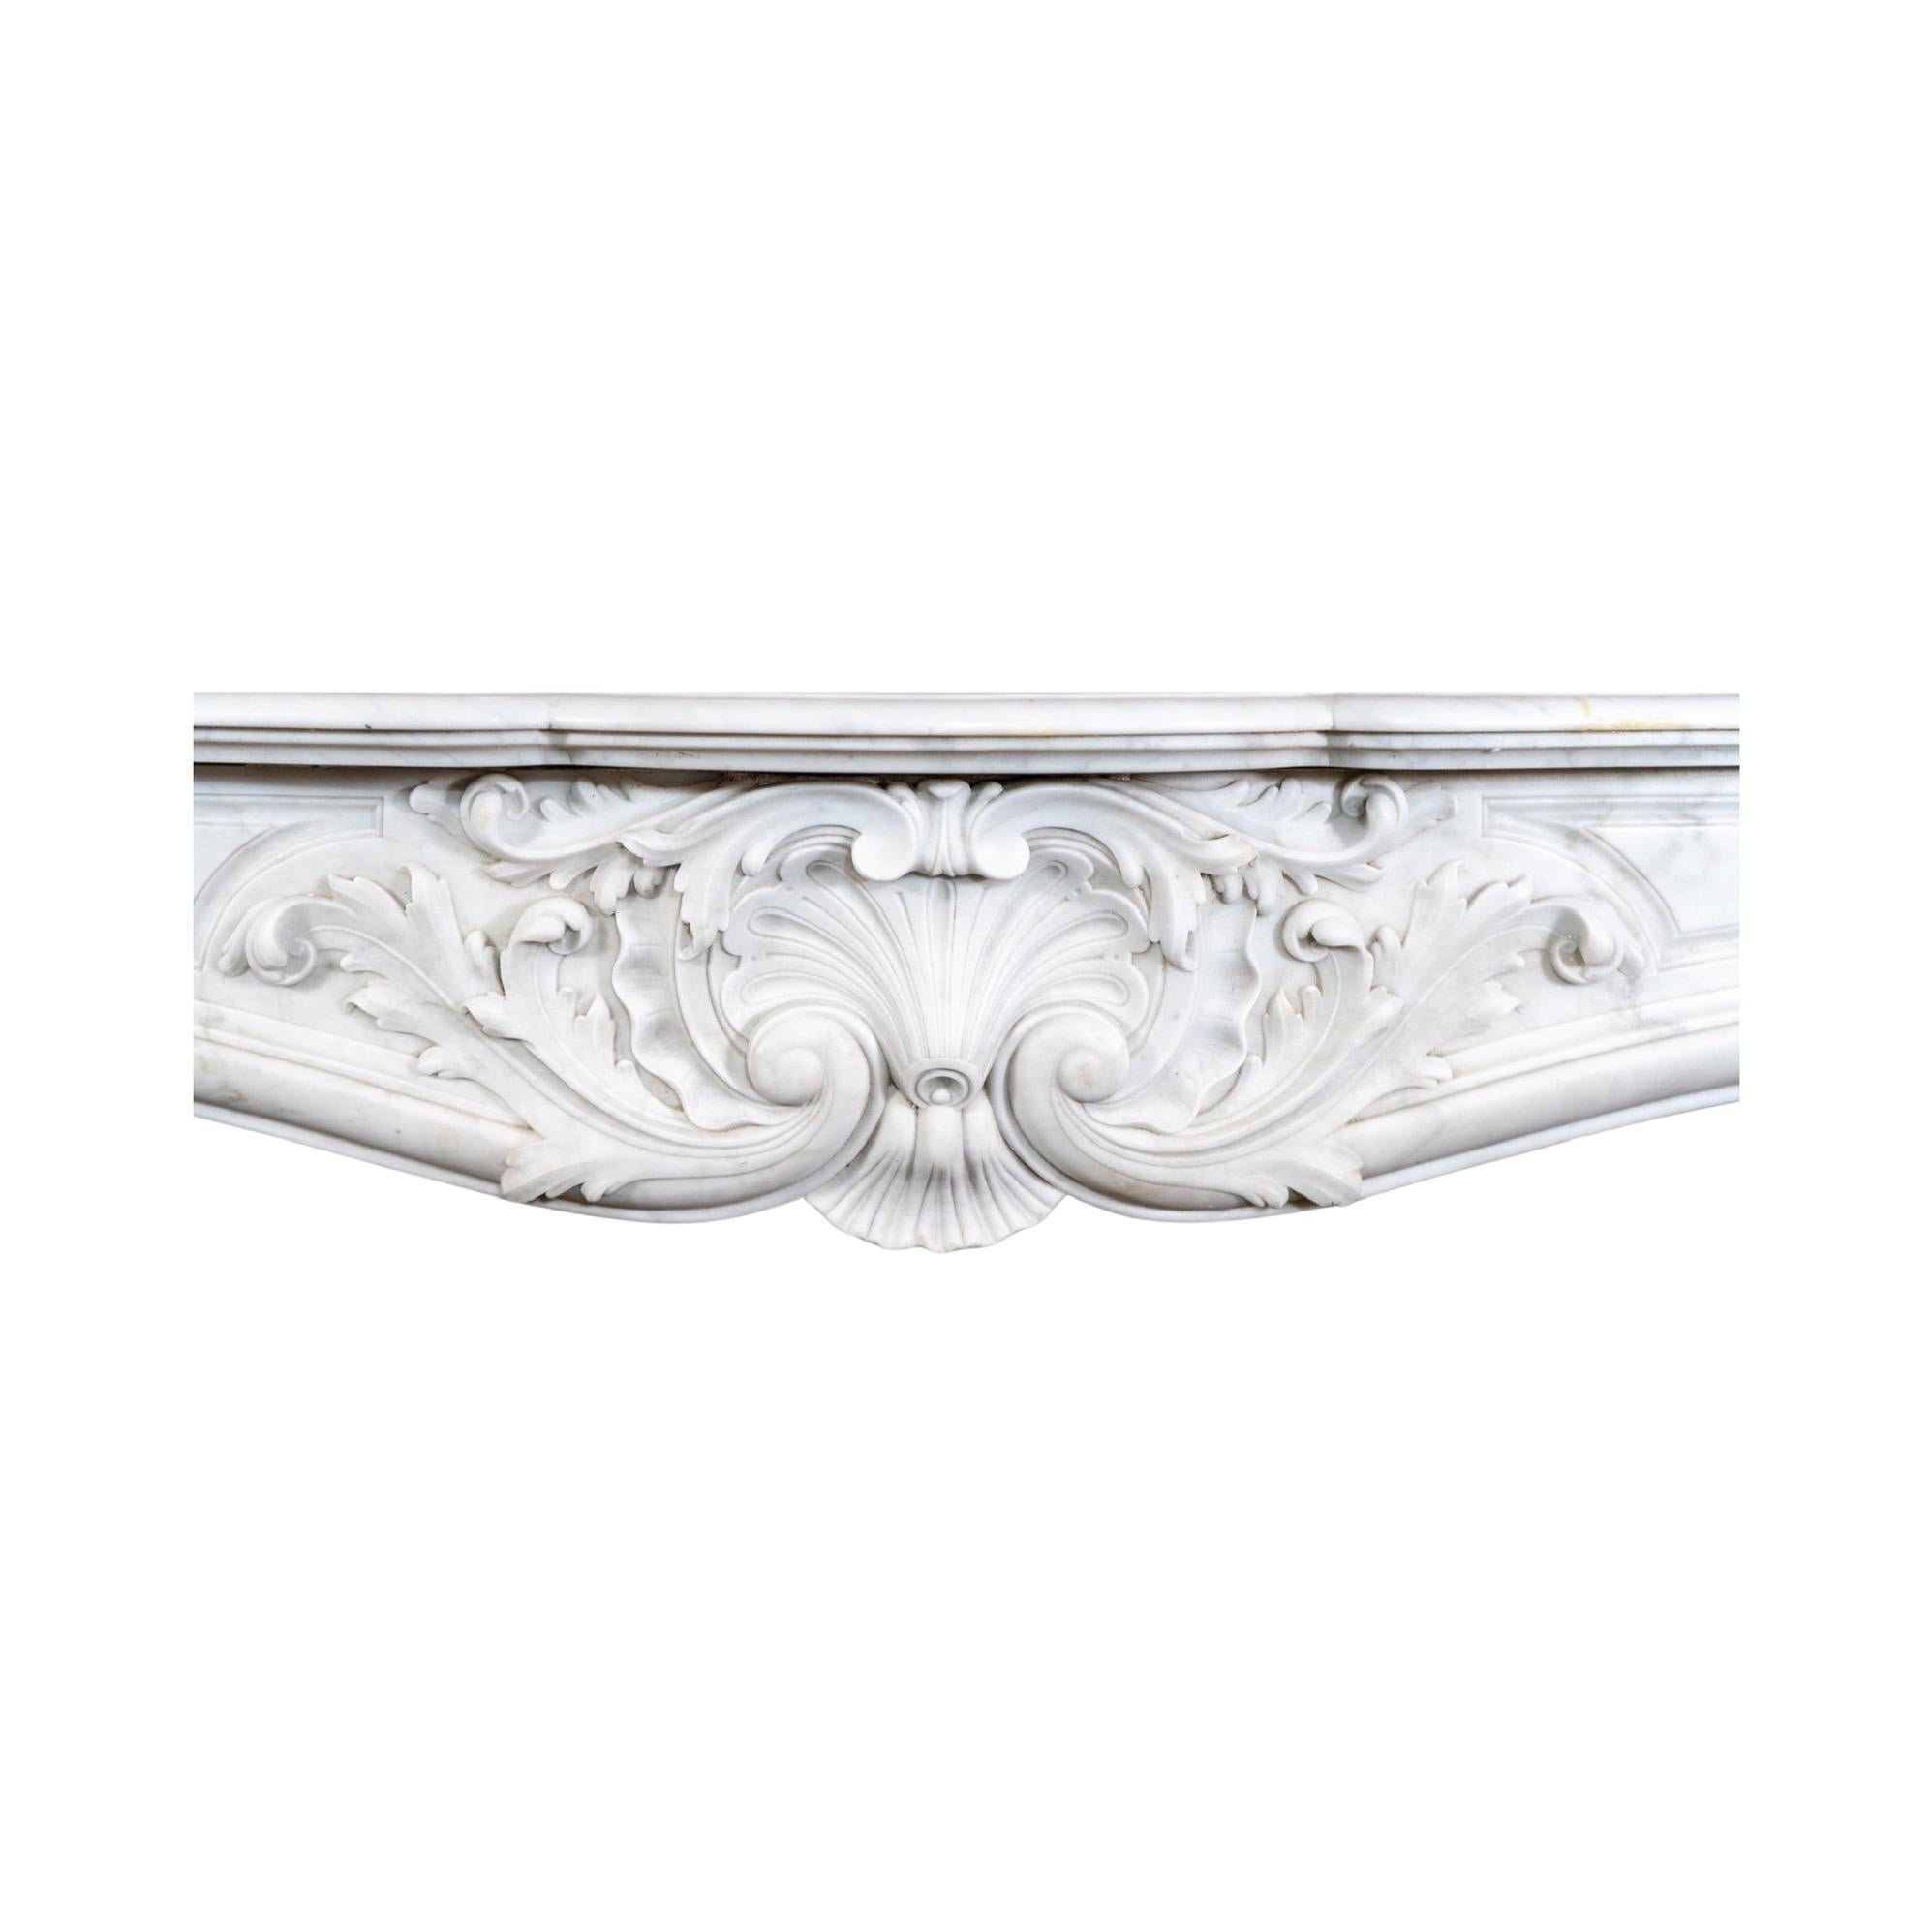 French White Veined Carrara Marble Mantel 2